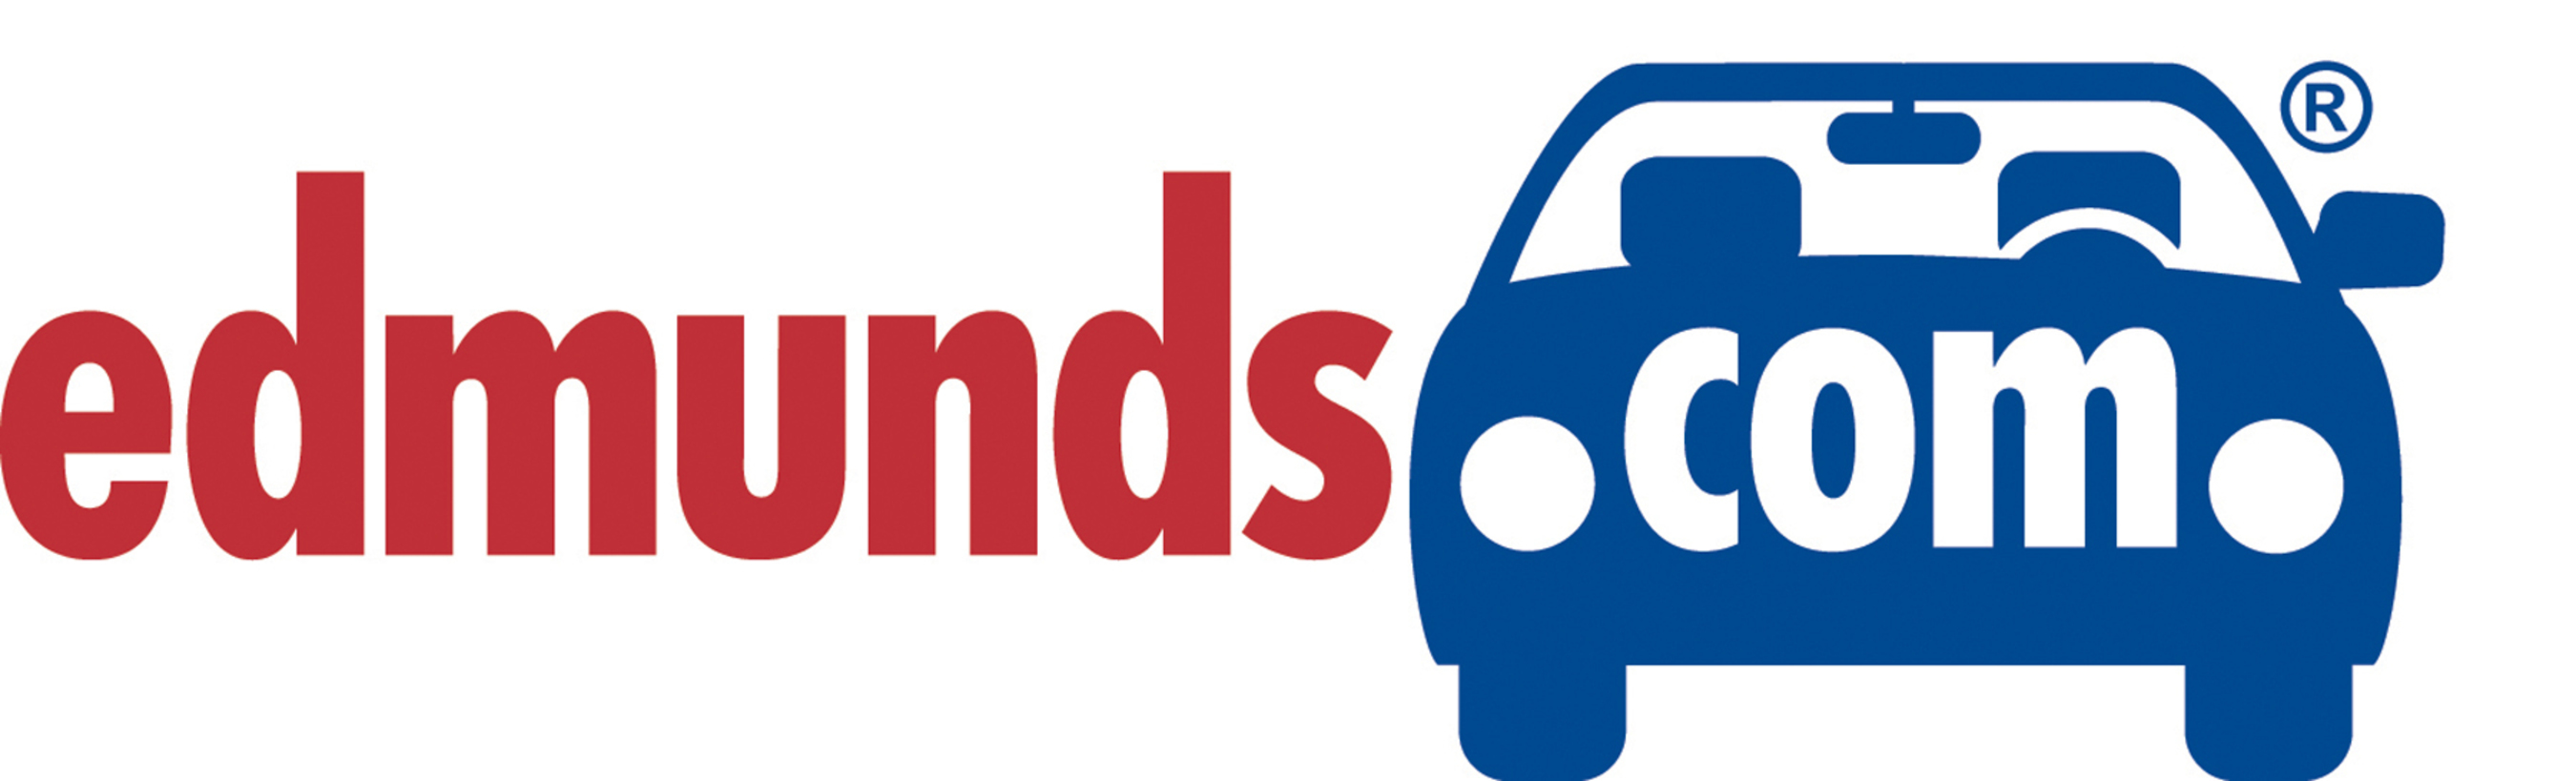 Car-buying platform Edmunds.com serves nearly 20 million visitors each month. With Edmunds.com Price Promise®, shoppers can buy smarter with instant, upfront prices for cars and trucks currently for sale at over 10,000 dealer franchises across the U.S.